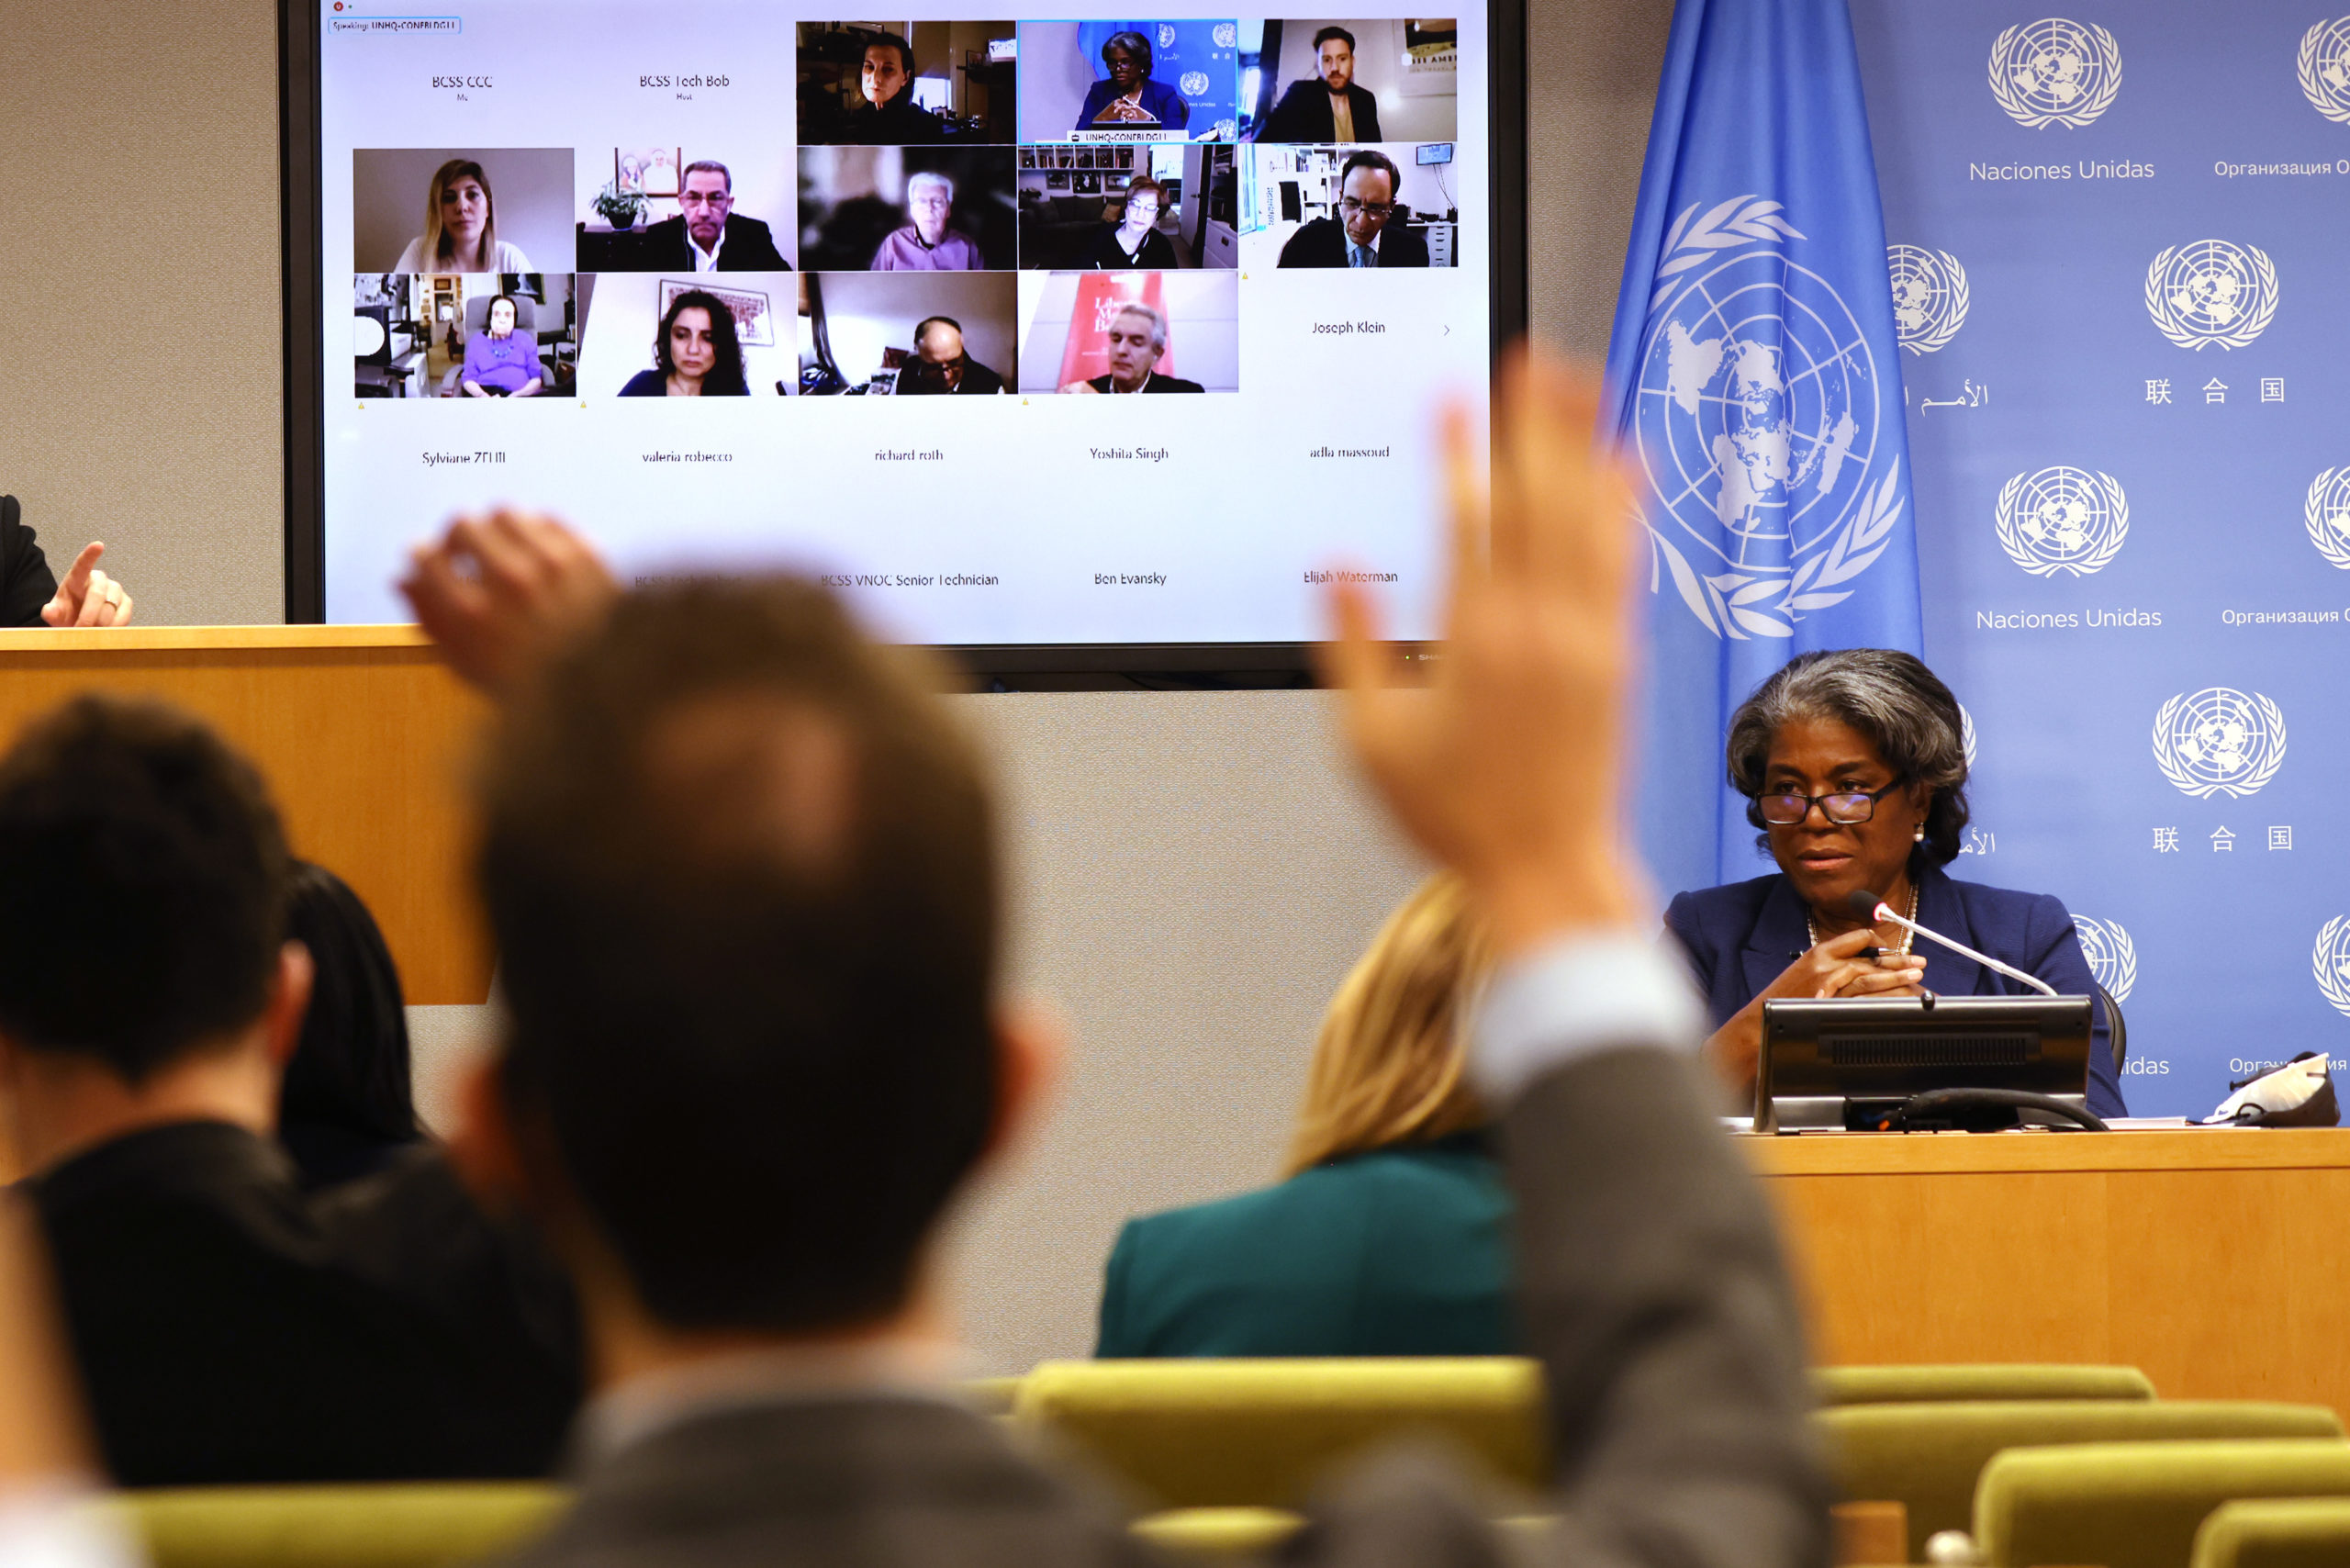 Linda Thomas-Greenfield, the new Ambassador to the United Nations, speaks to the media on Monday in New York City. (Spencer Platt/Getty Images)